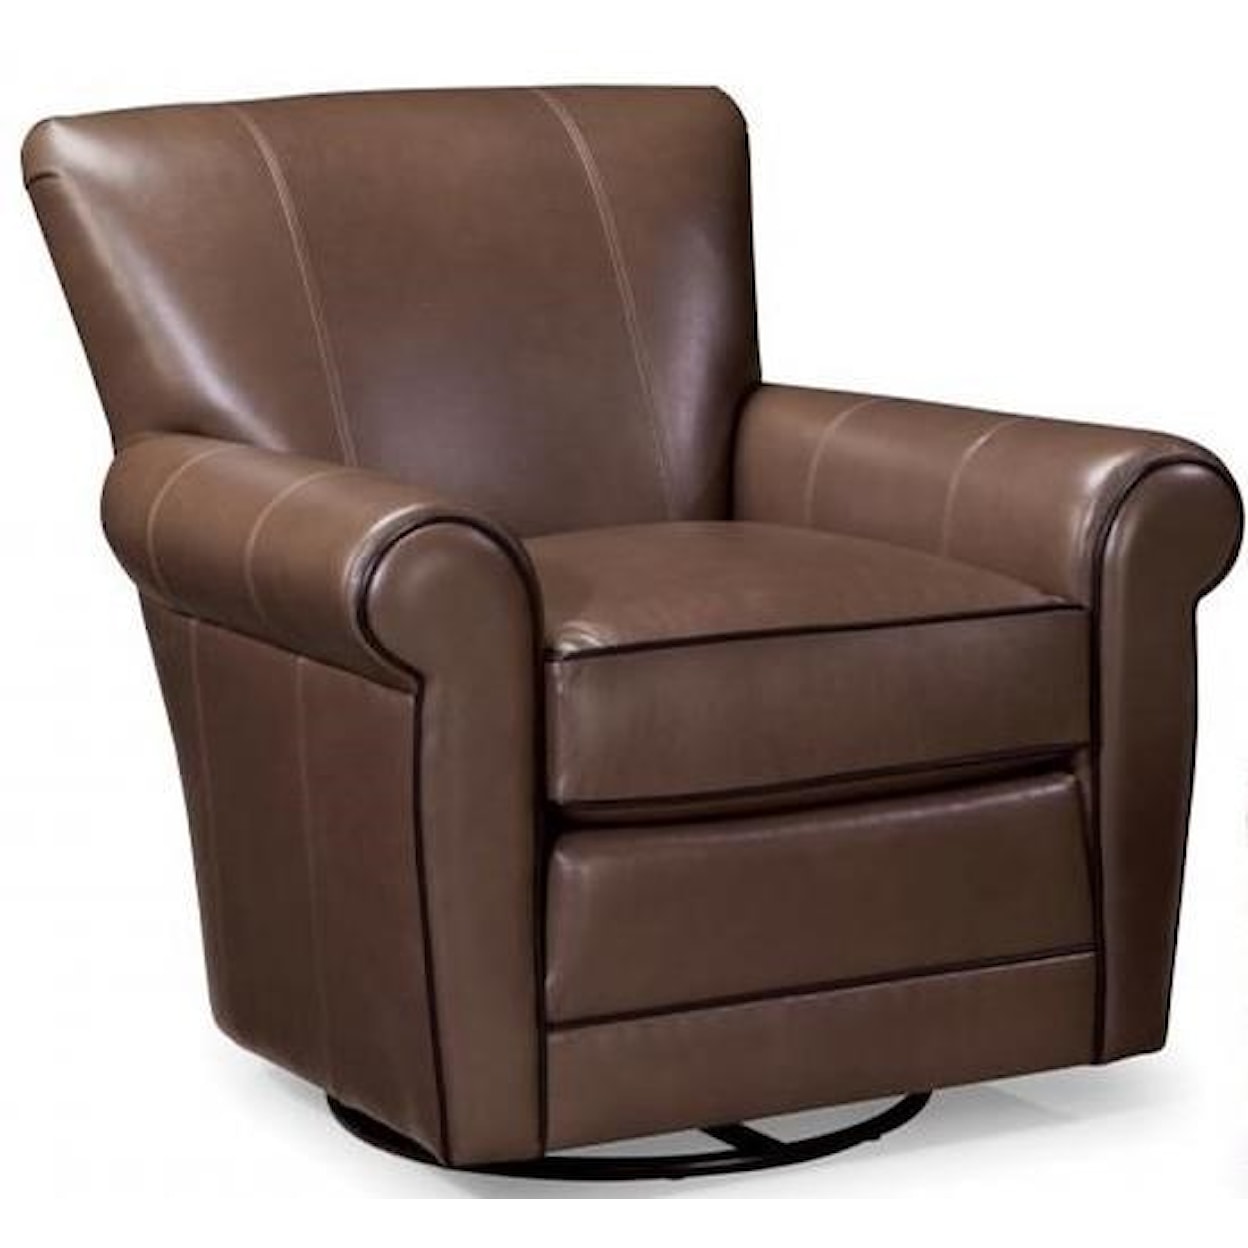 Smith Brothers Smith Brothers Swivel Chair